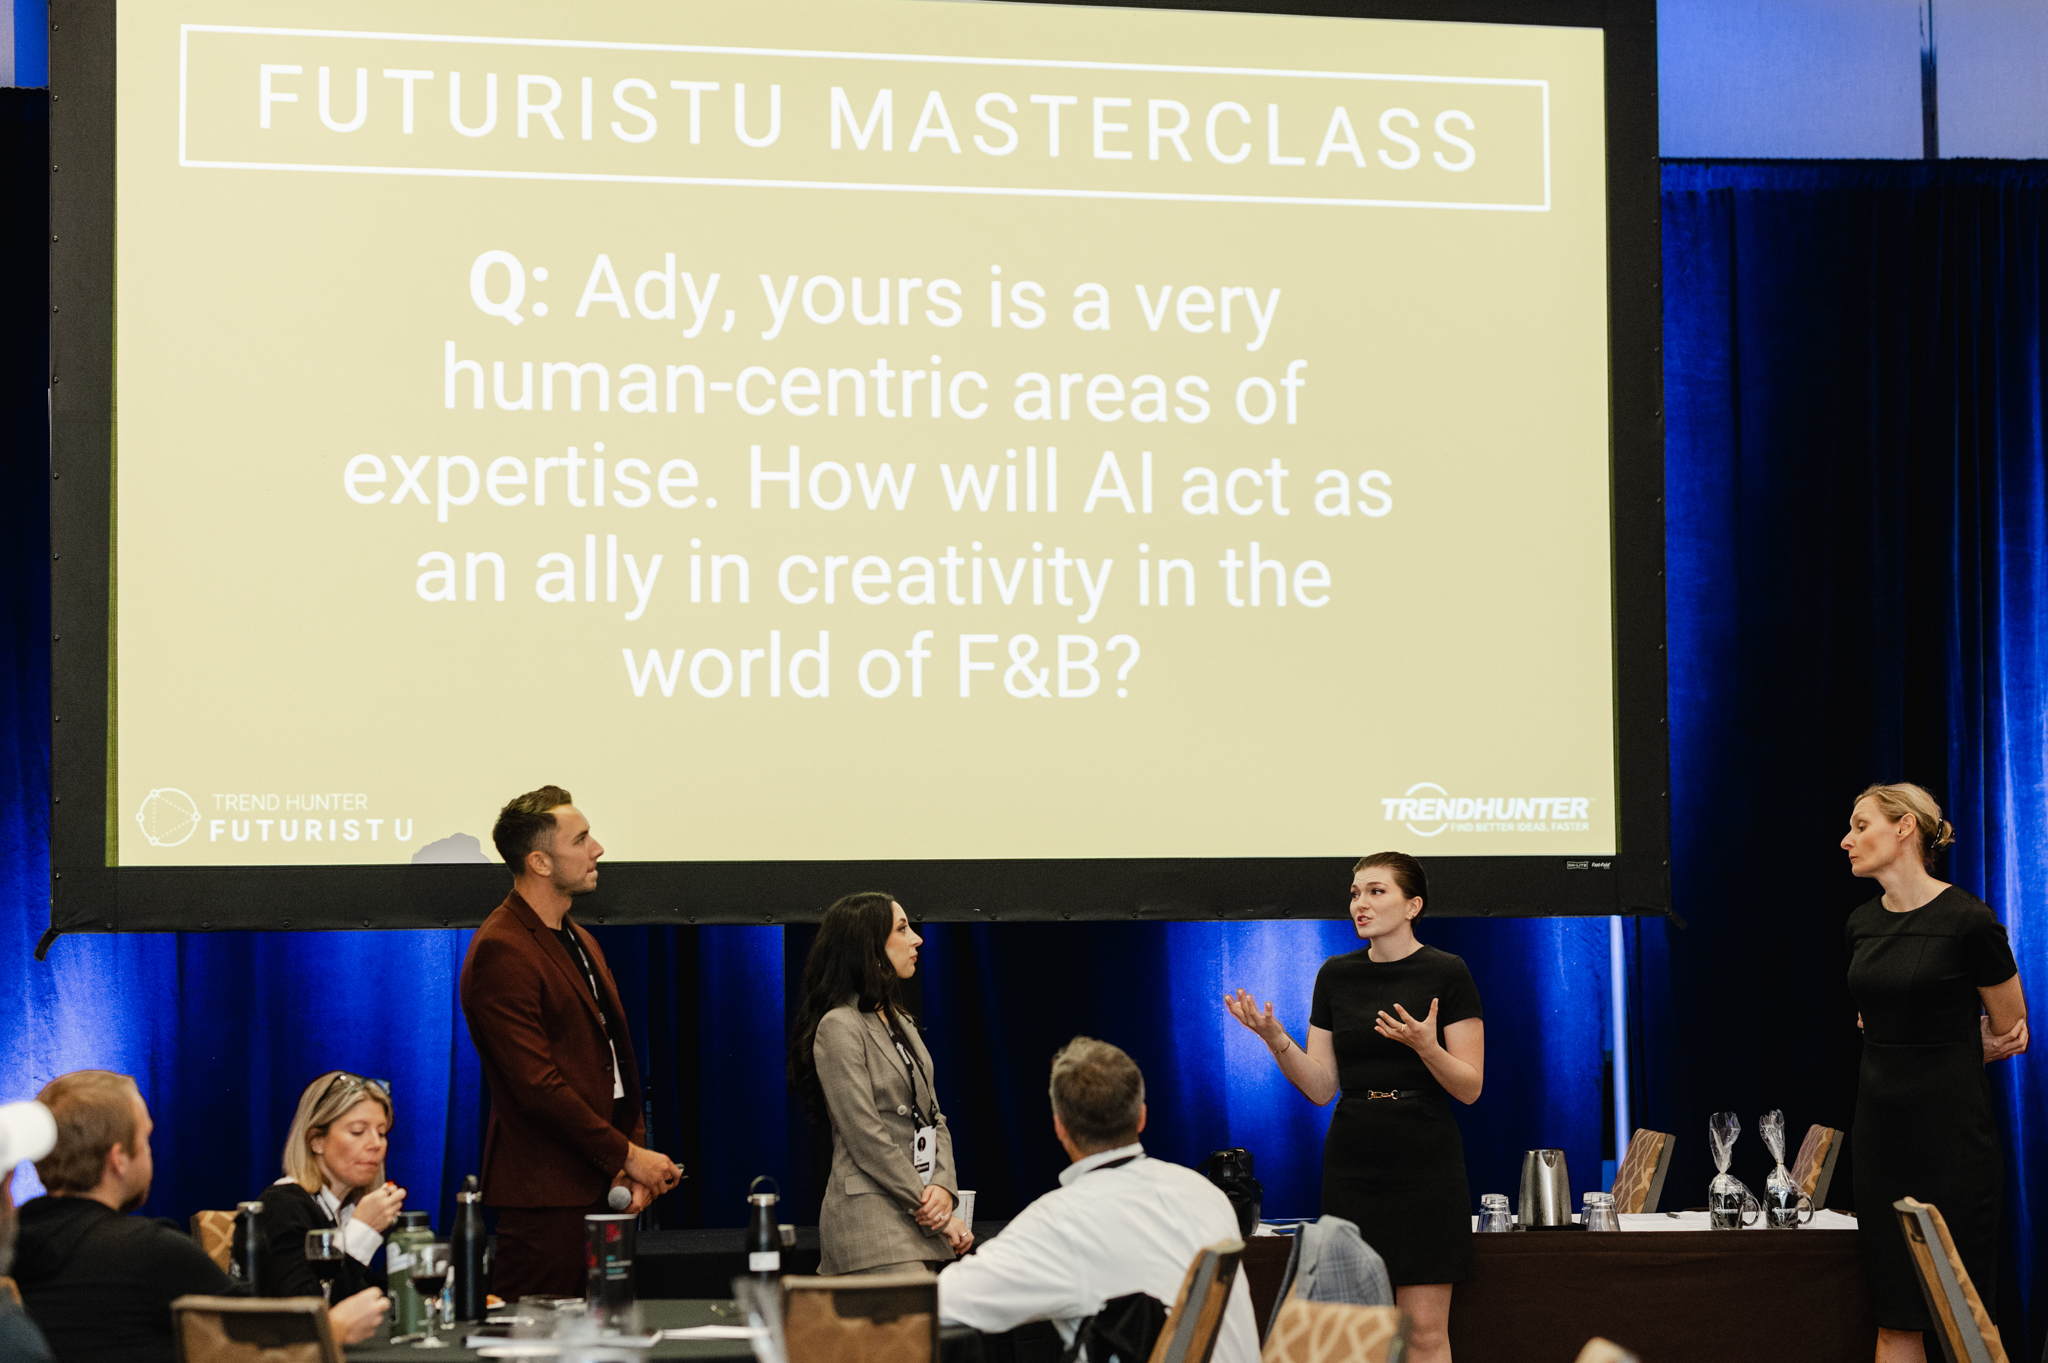 An event photography capture of a group of people standing in front of a screen displaying the words futurist masterclass.